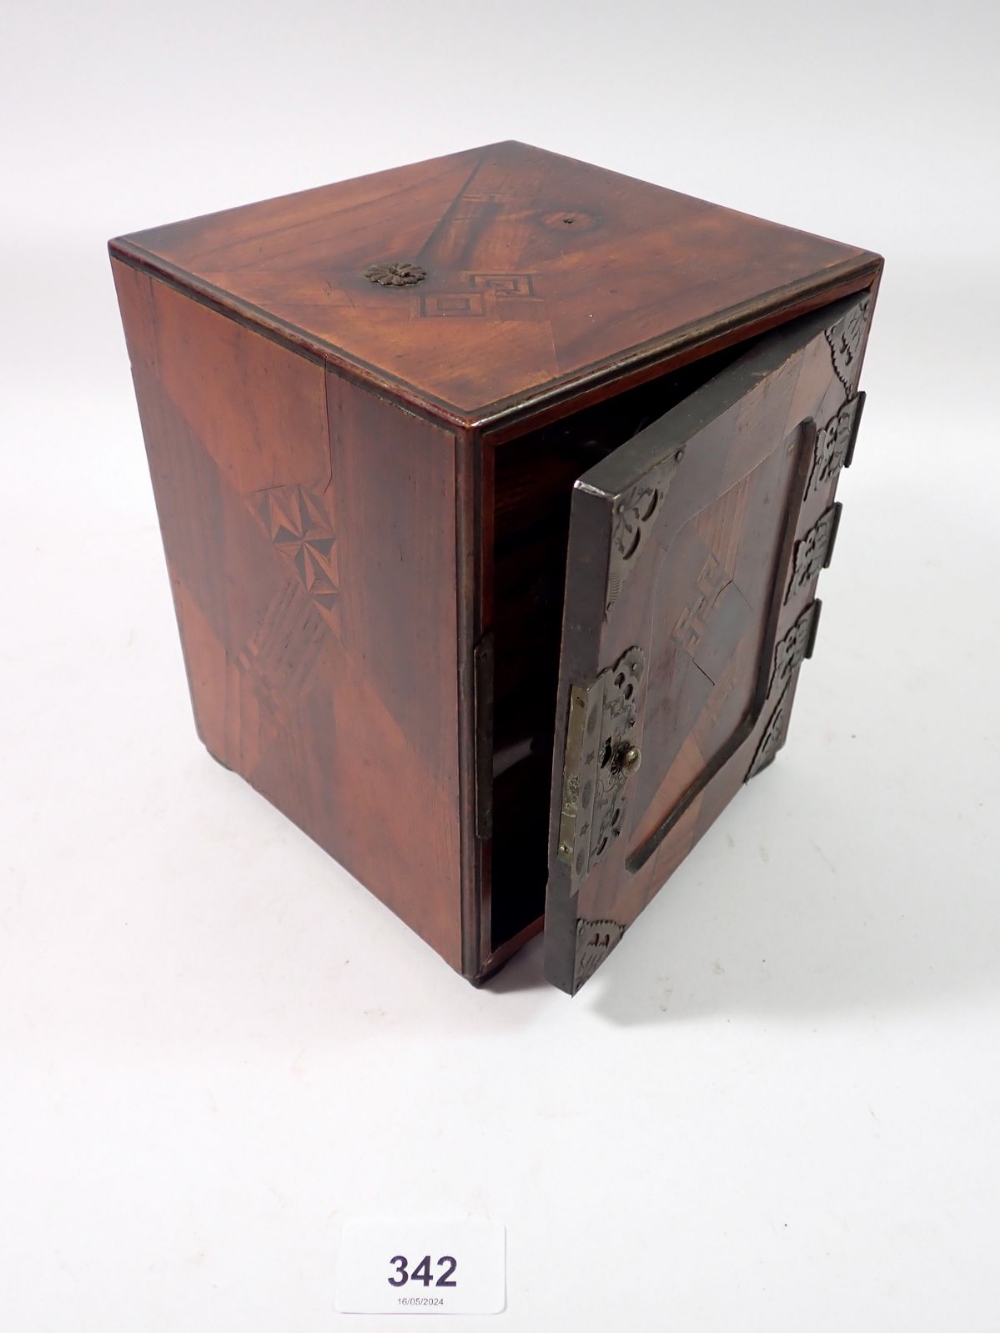 A Japanese marquetry box with three small drawers, 14.5 x 14.5 x 18cm